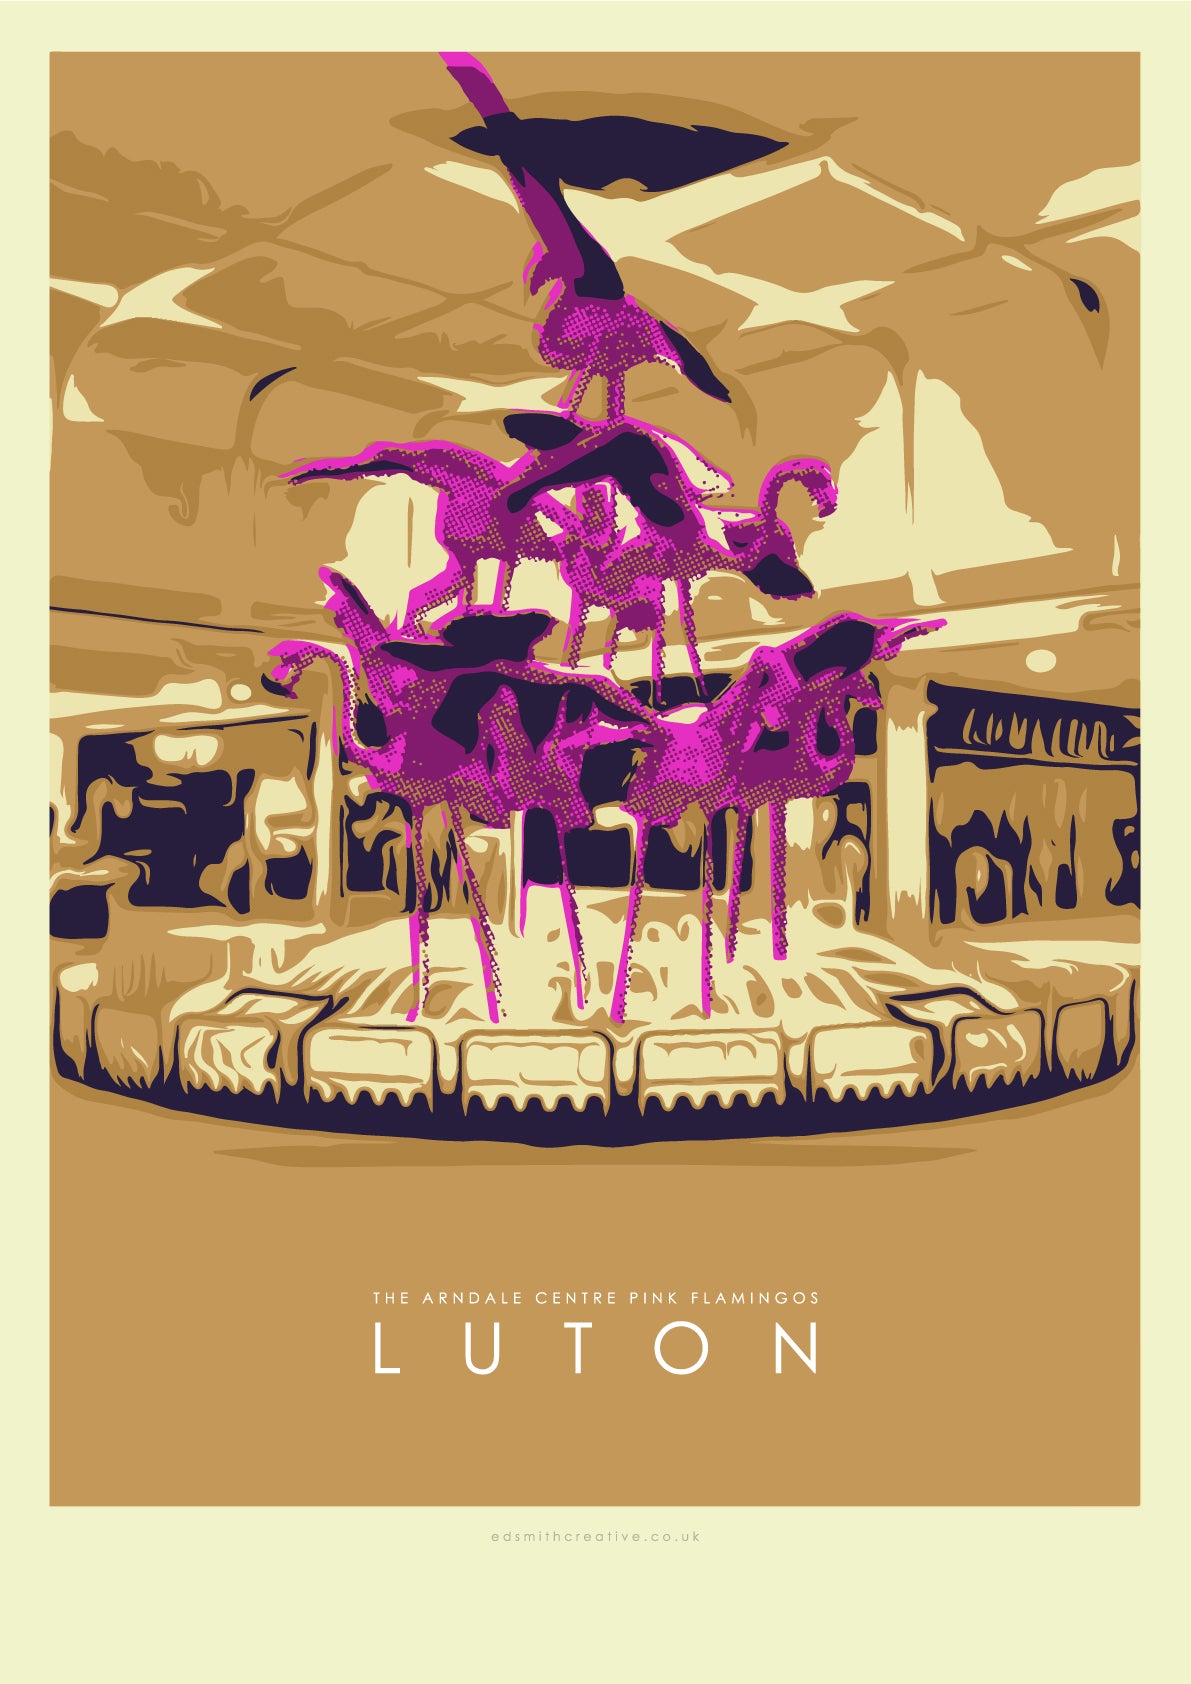 Iconic Luton Poster: The Arndale Centre Pink Flamingos